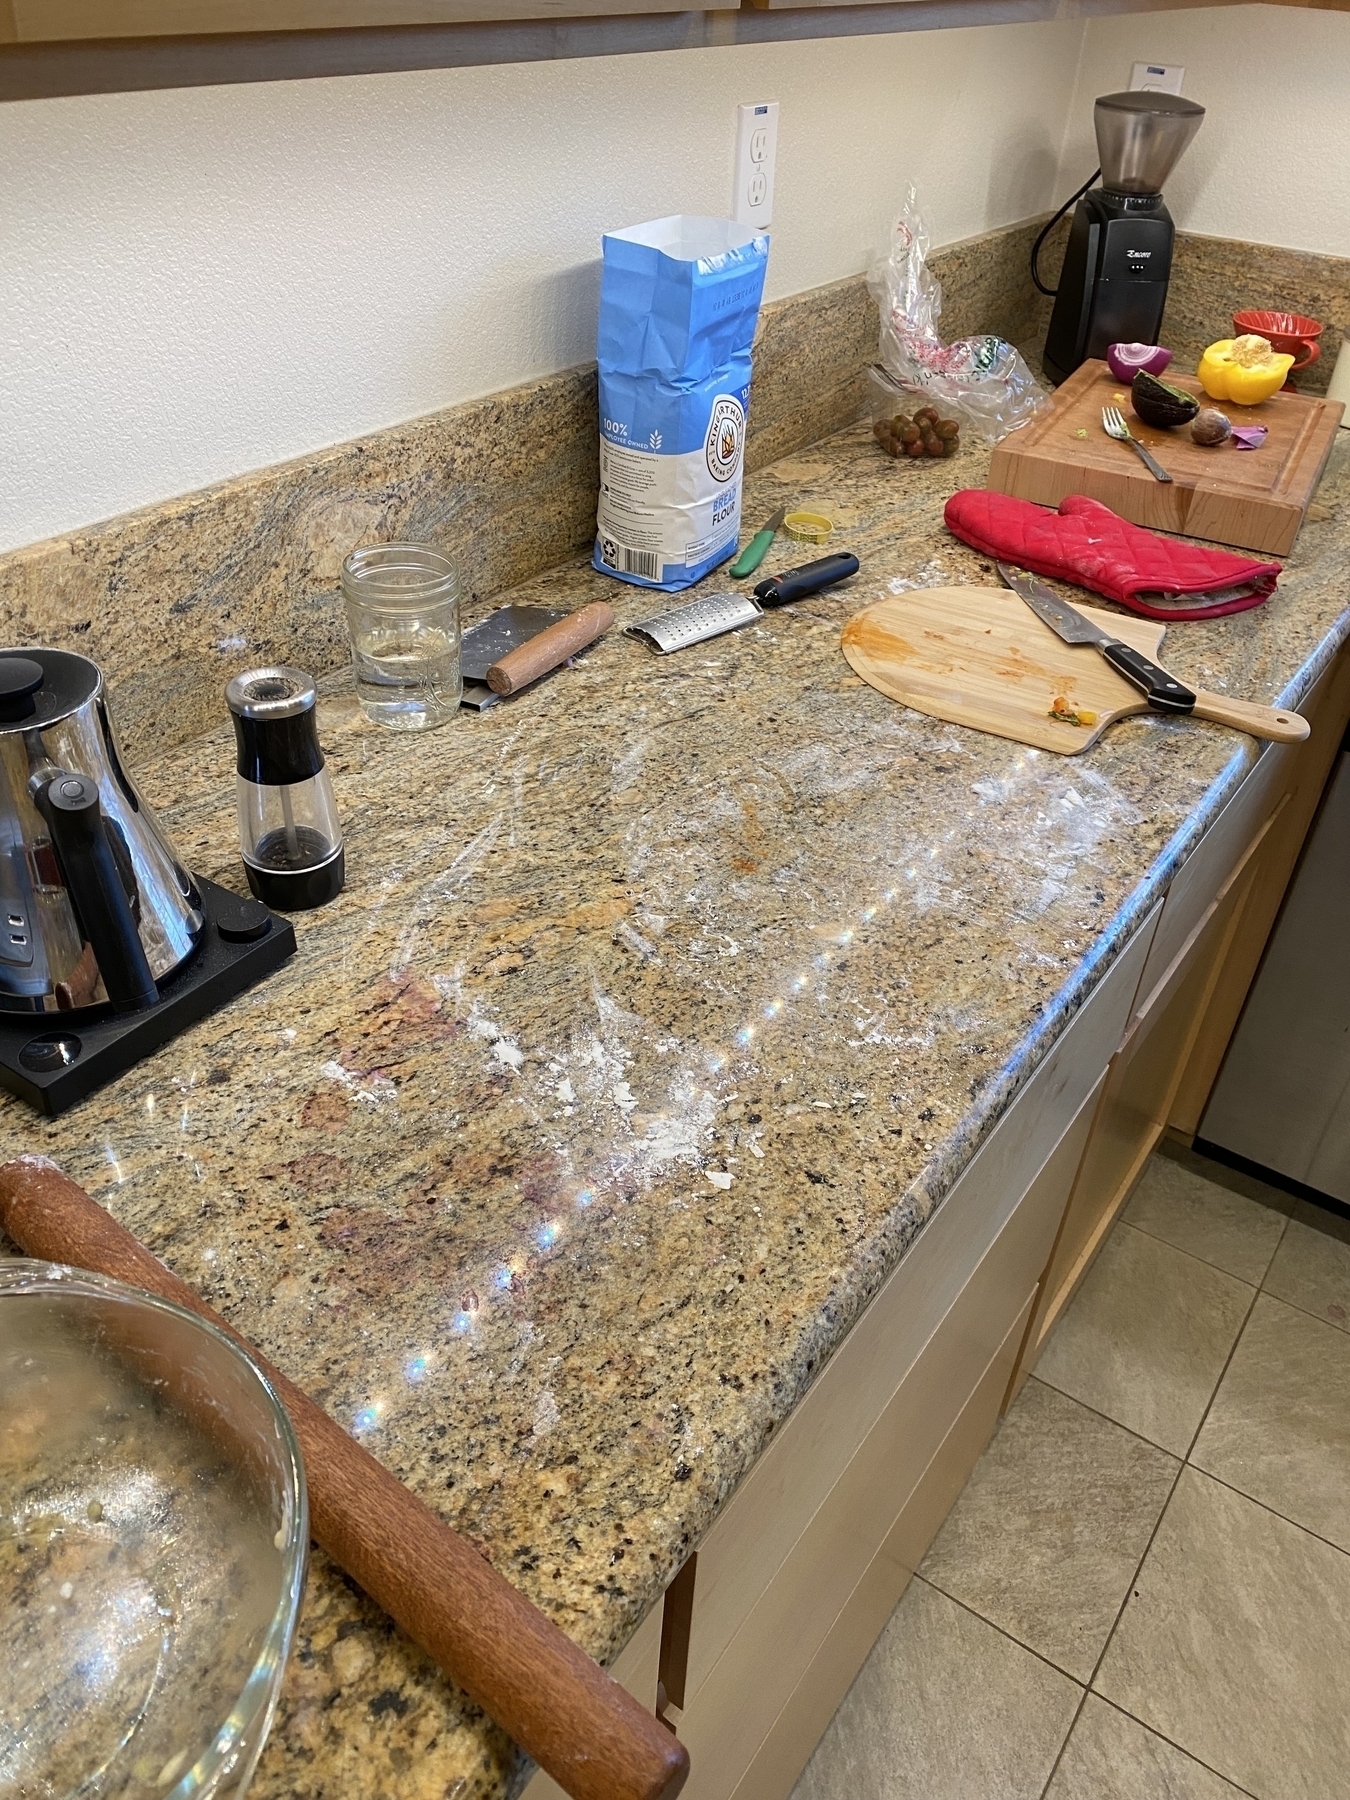 A messy kitchen countertop covered with the detritus from pizza crust making 